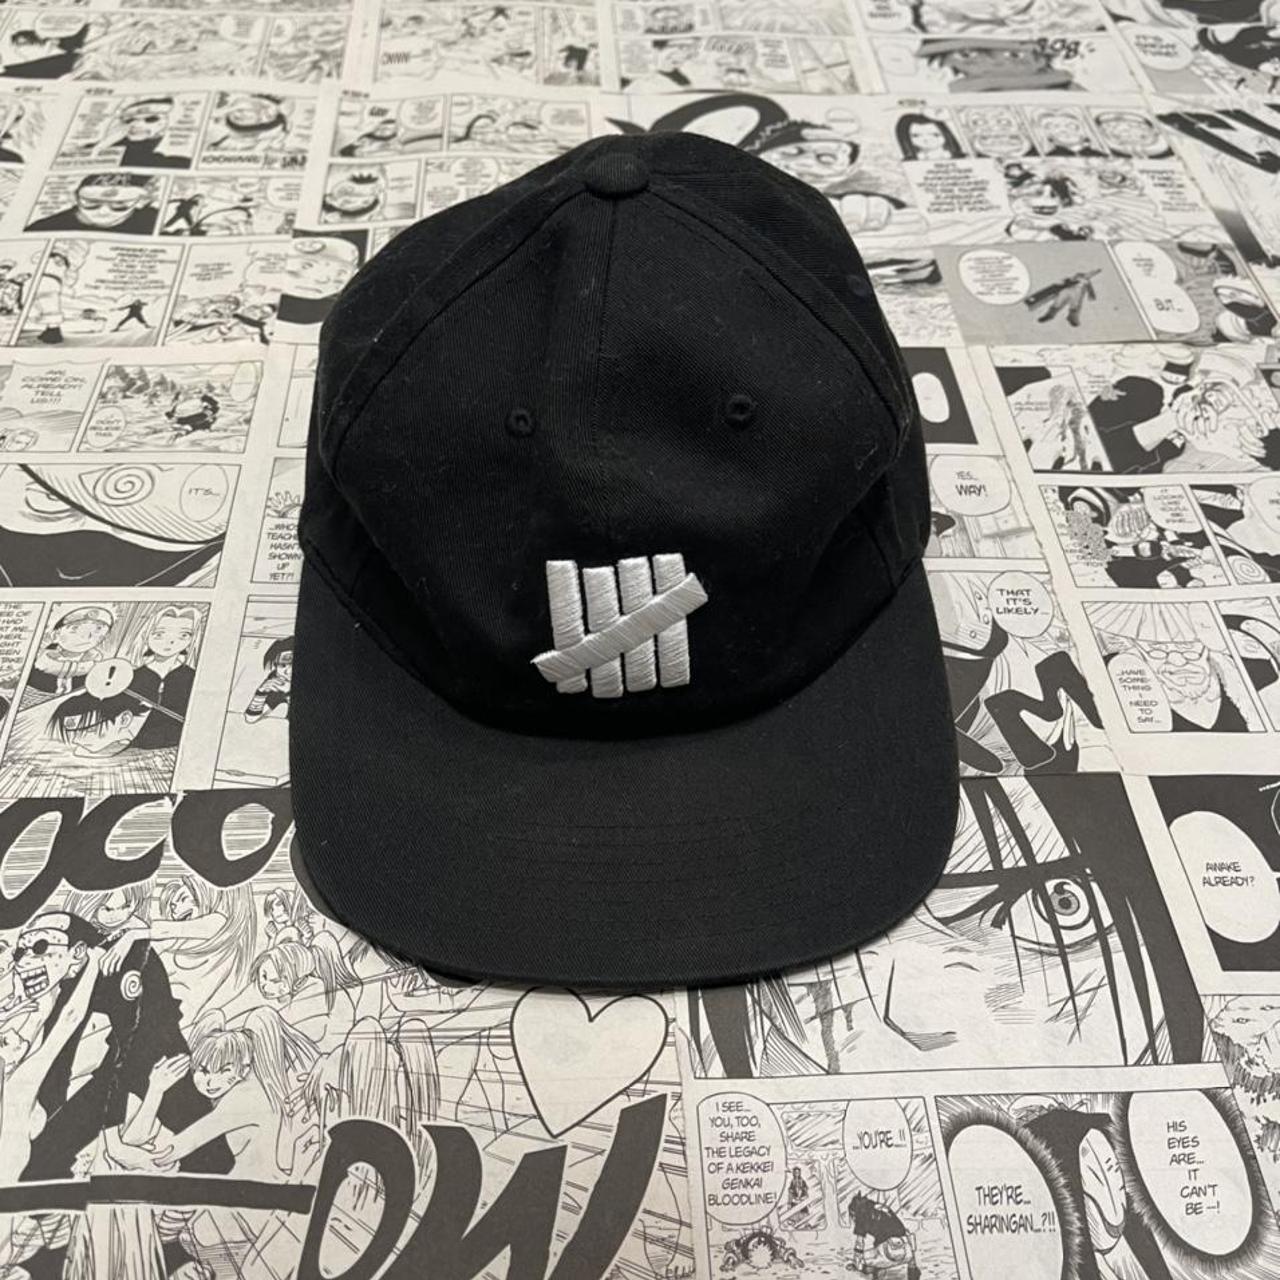 Undefeated Men's Black and White Hat